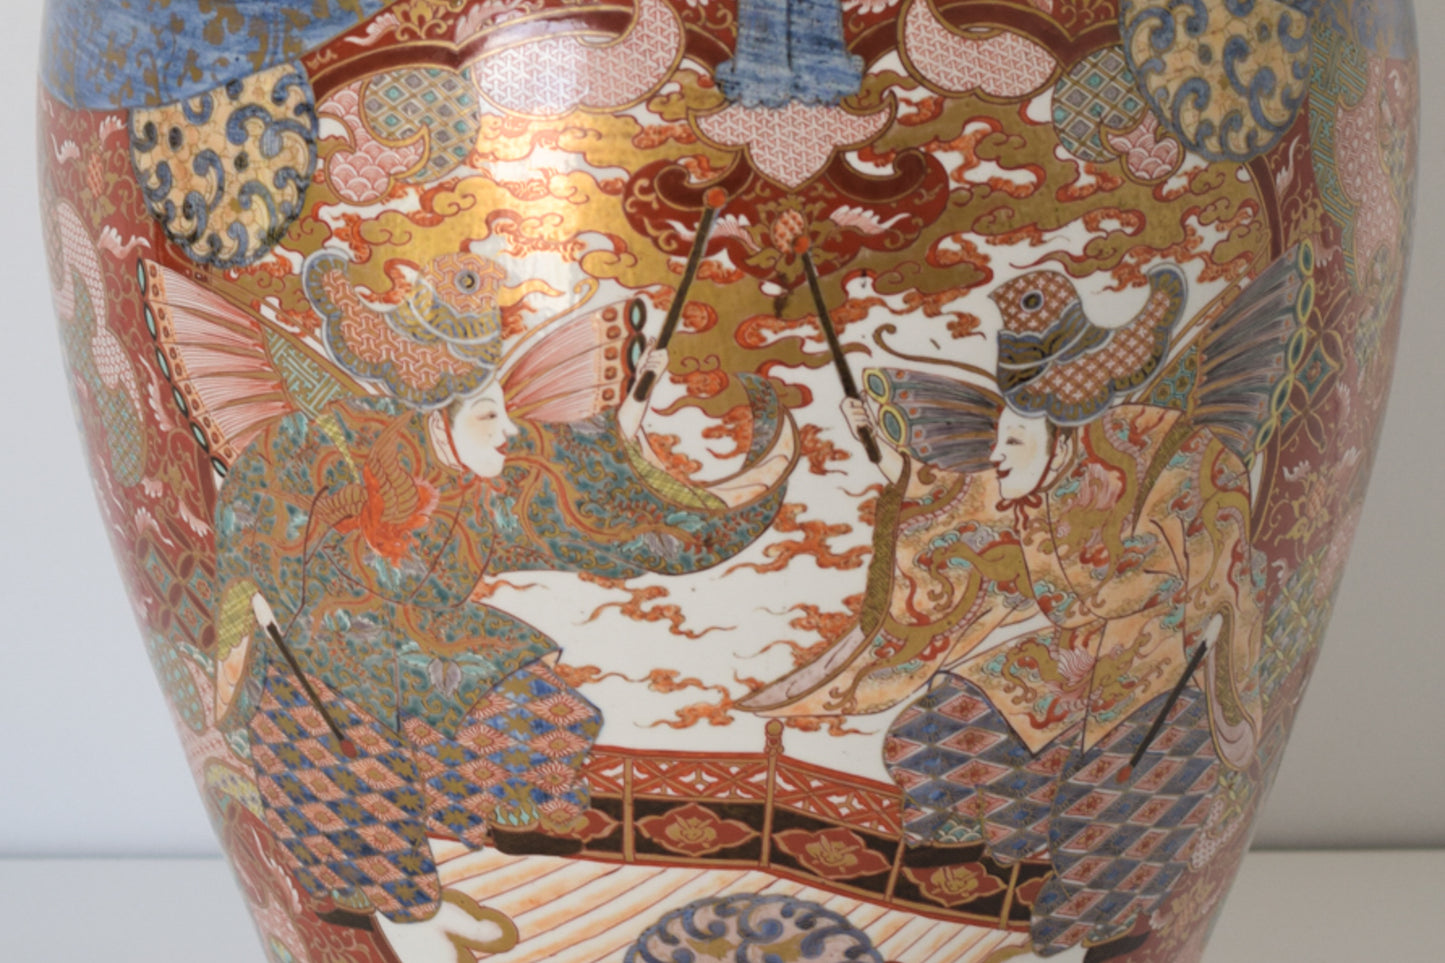 Large Arita Jar and Lid decorated with images of Samurais and Geishas_Detail